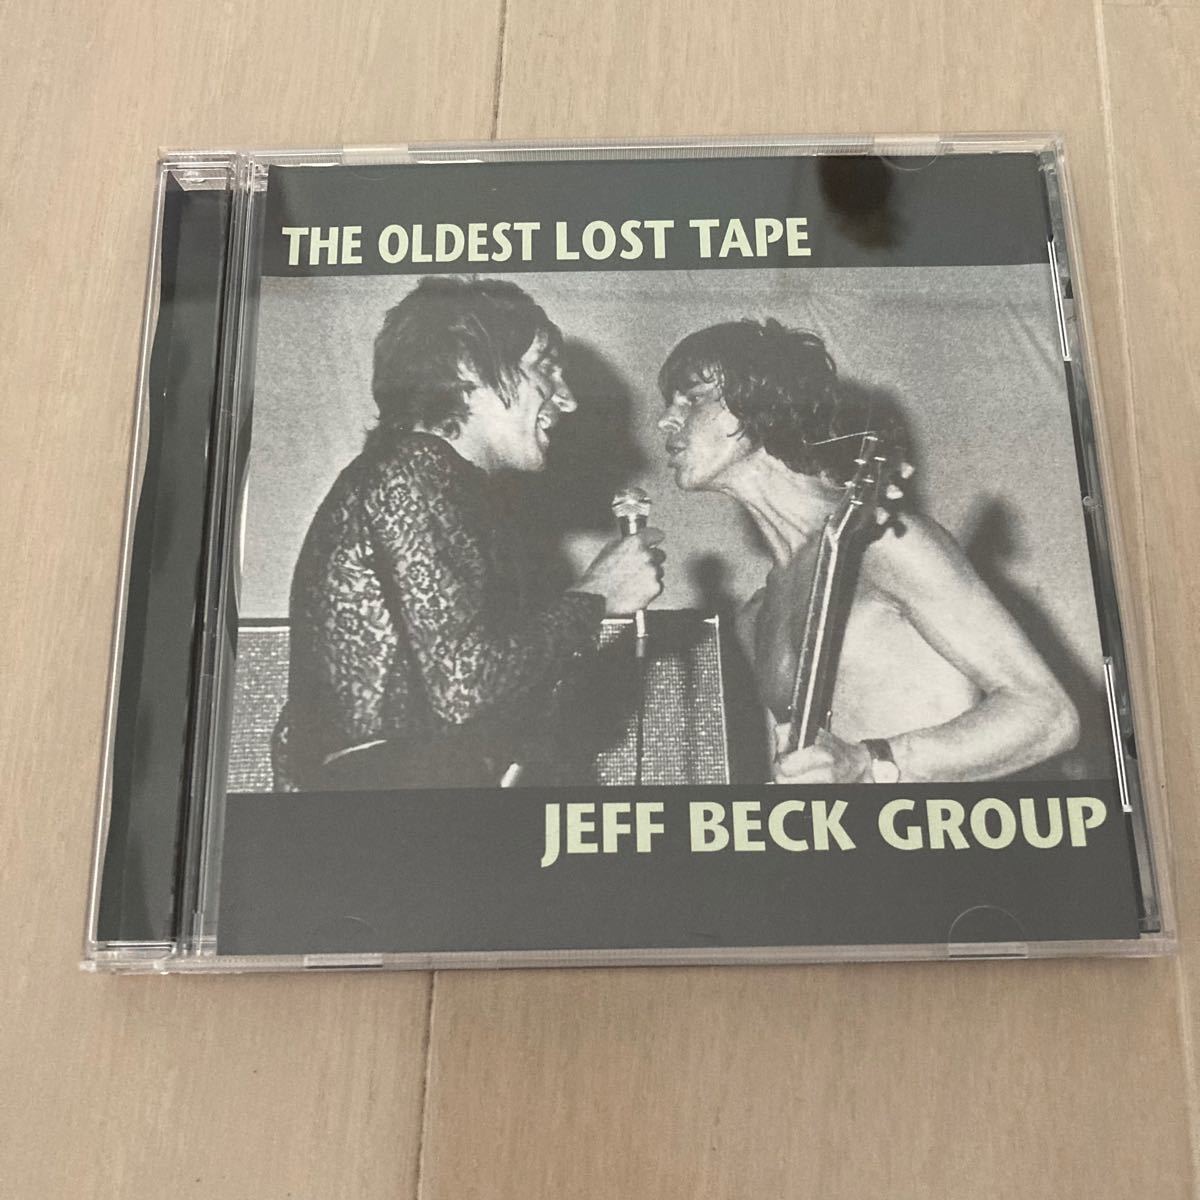 Jeff Beck Group /The oldest lost tape